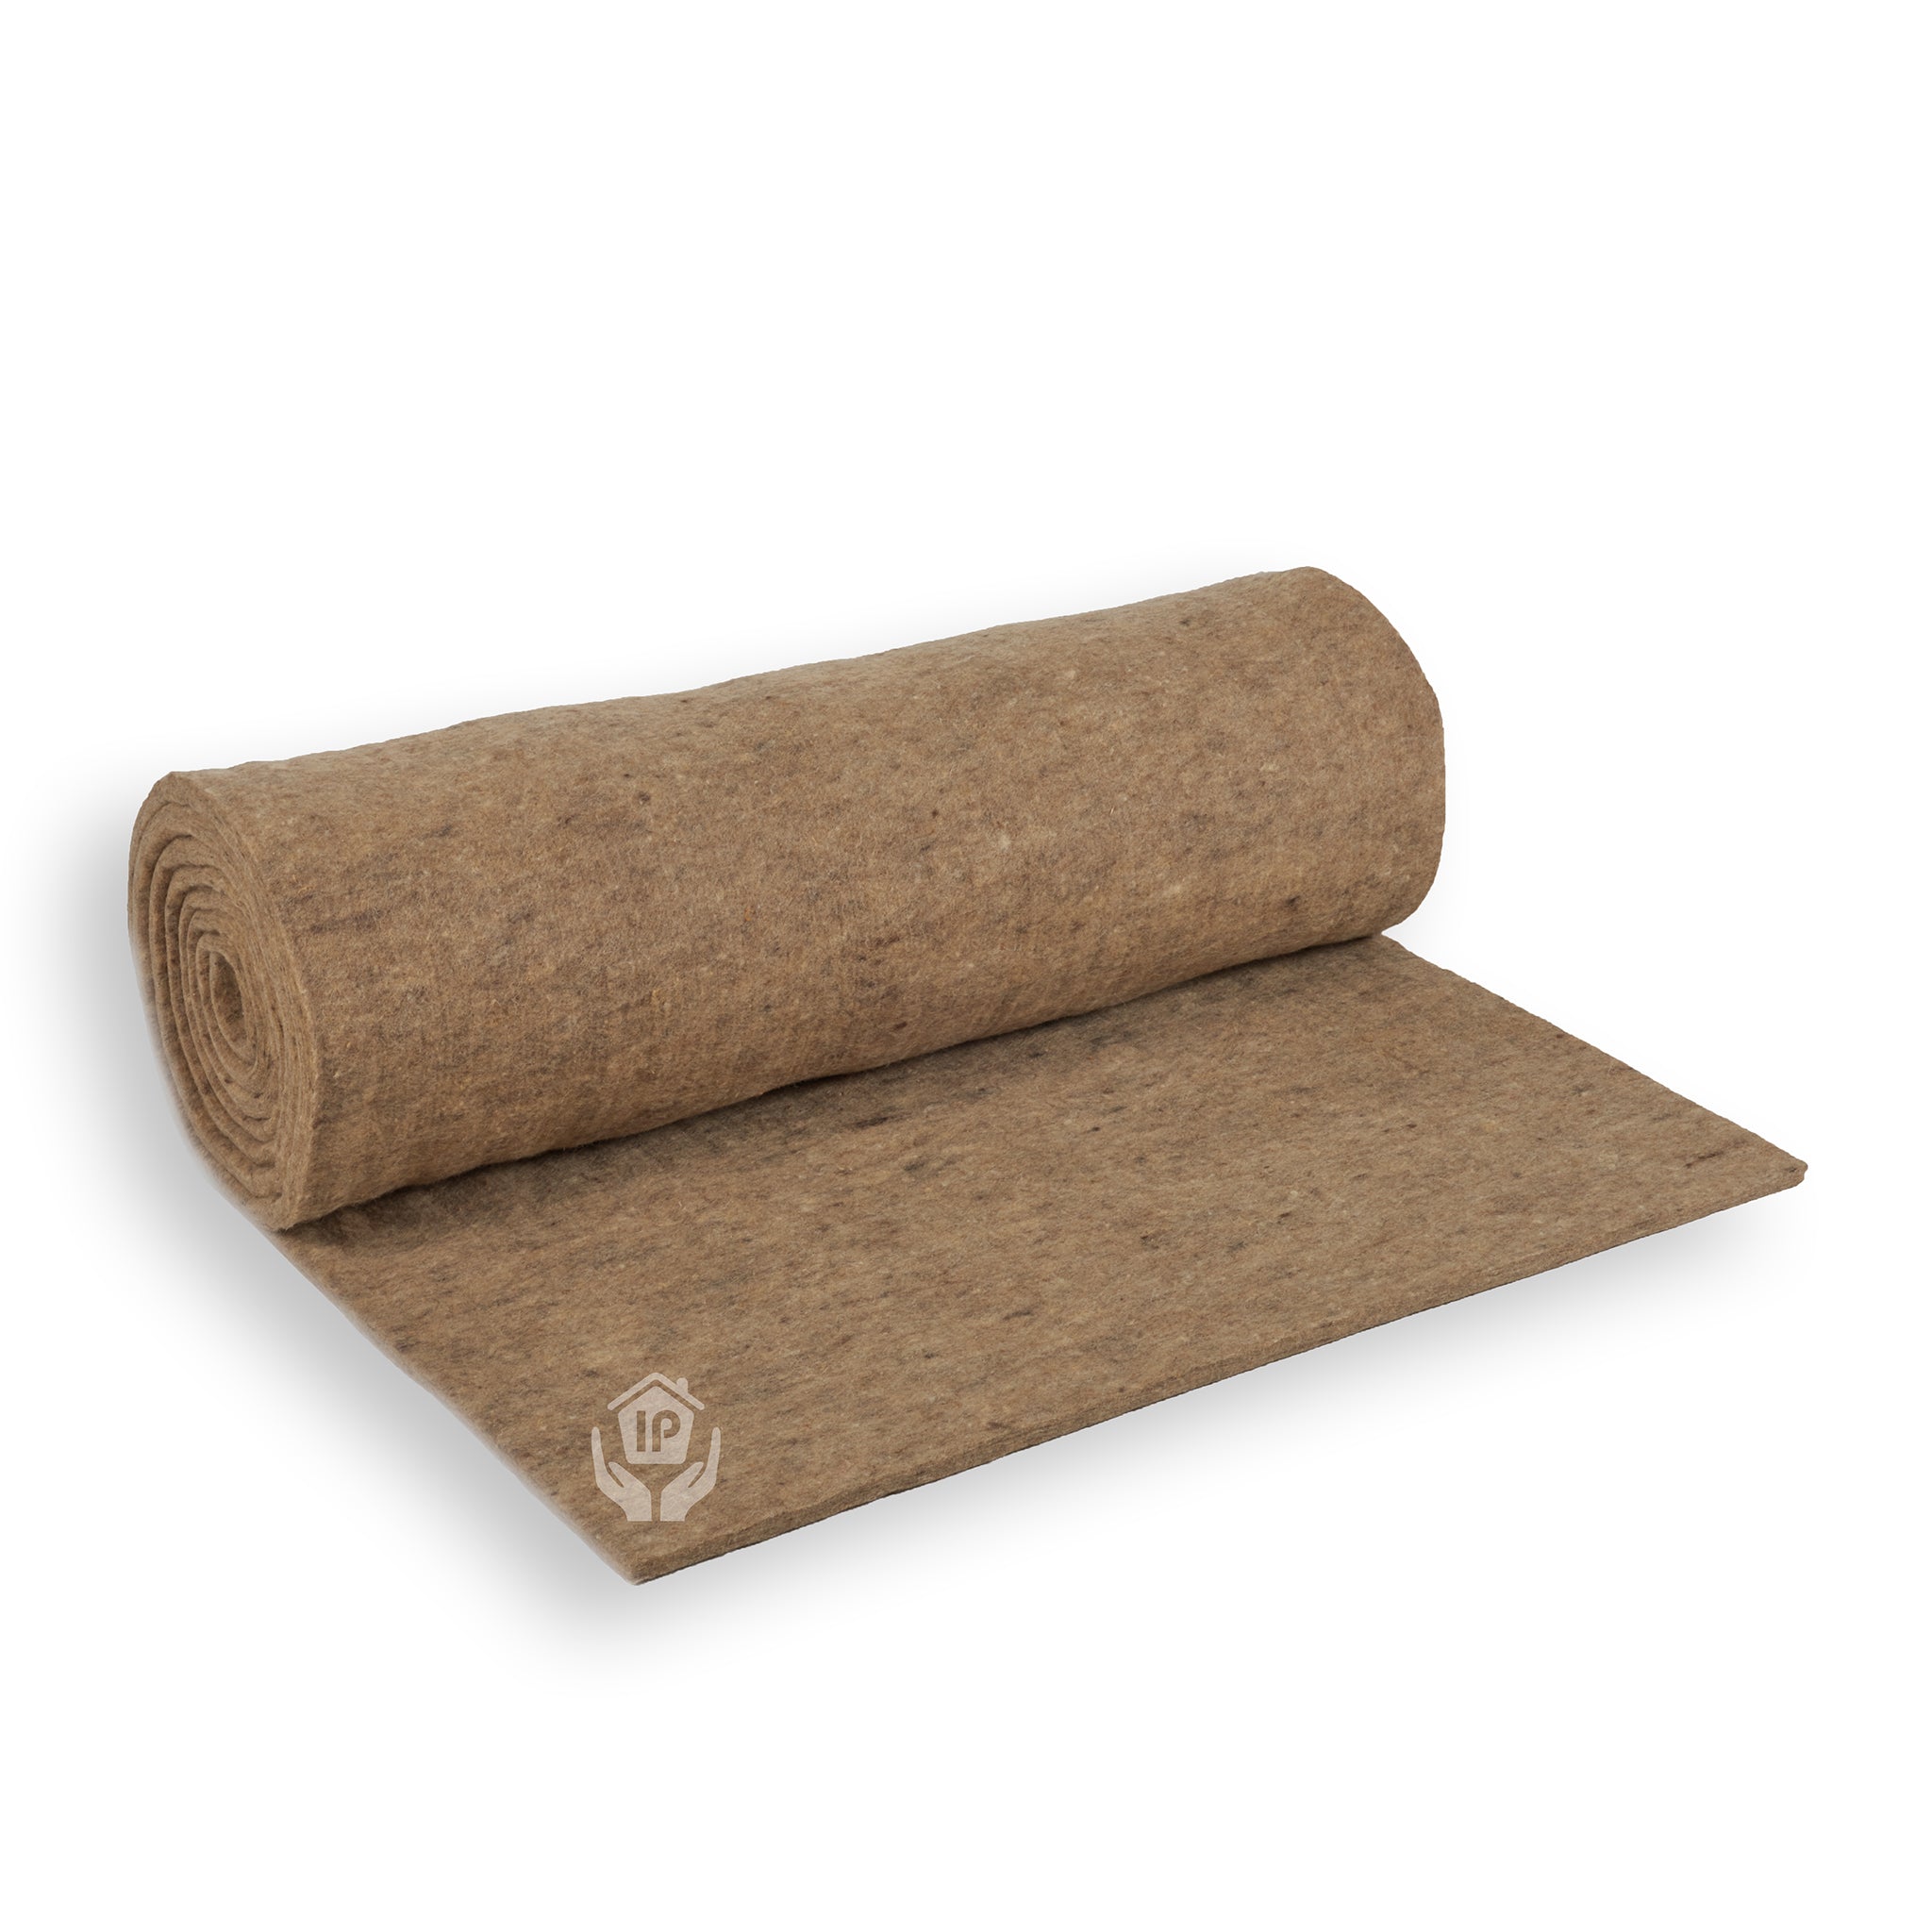 Sheep Wool Carpet Underlay for sound proofing and insulation